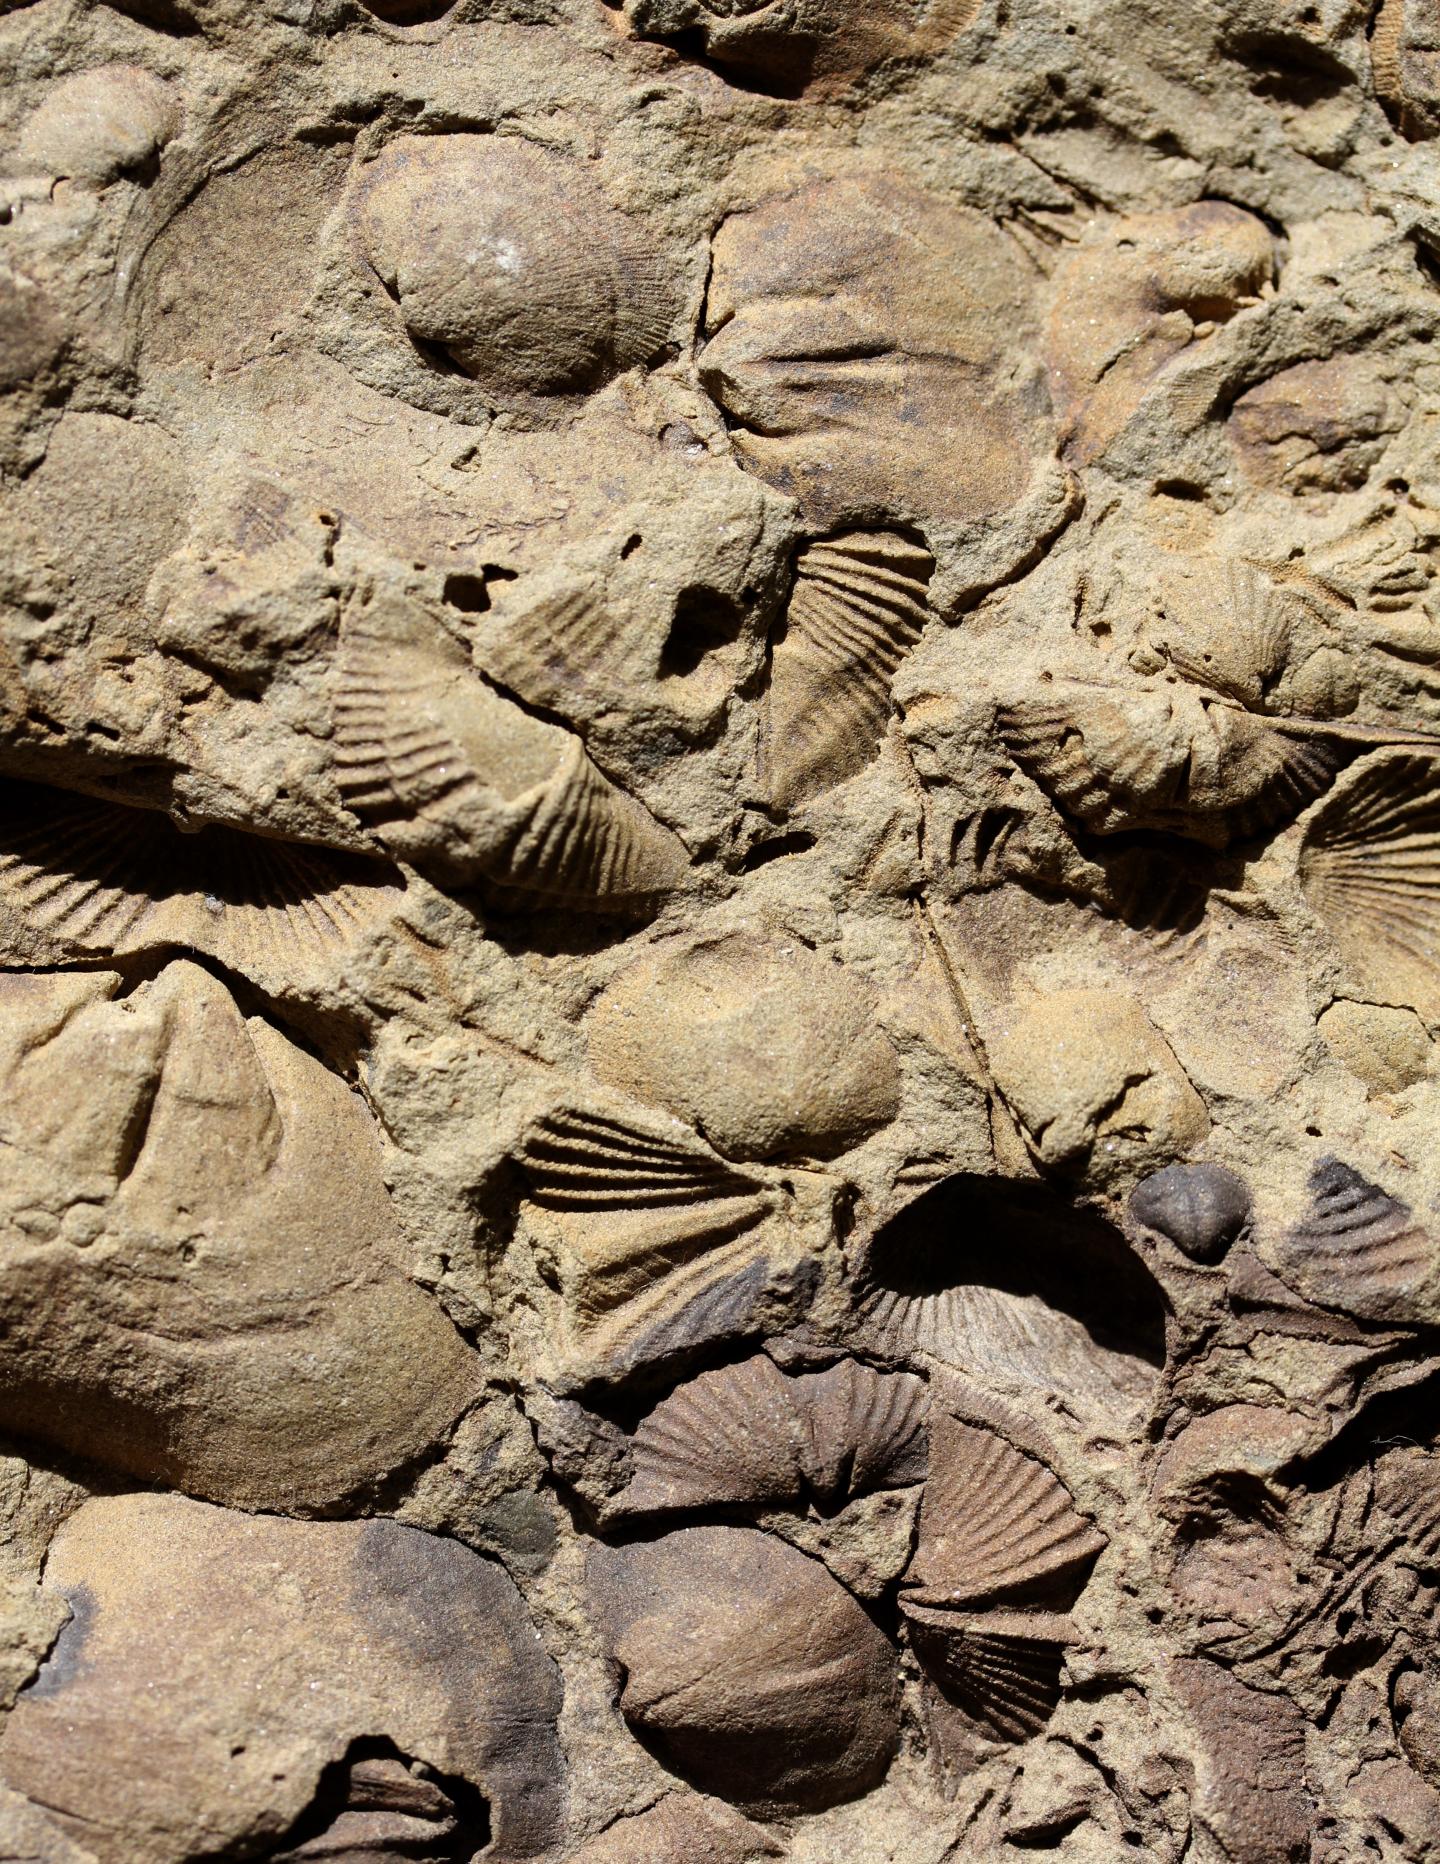 Late Devonian Brachiopod Fossils Preserved as Molds in a Fine-Grained Sandstone